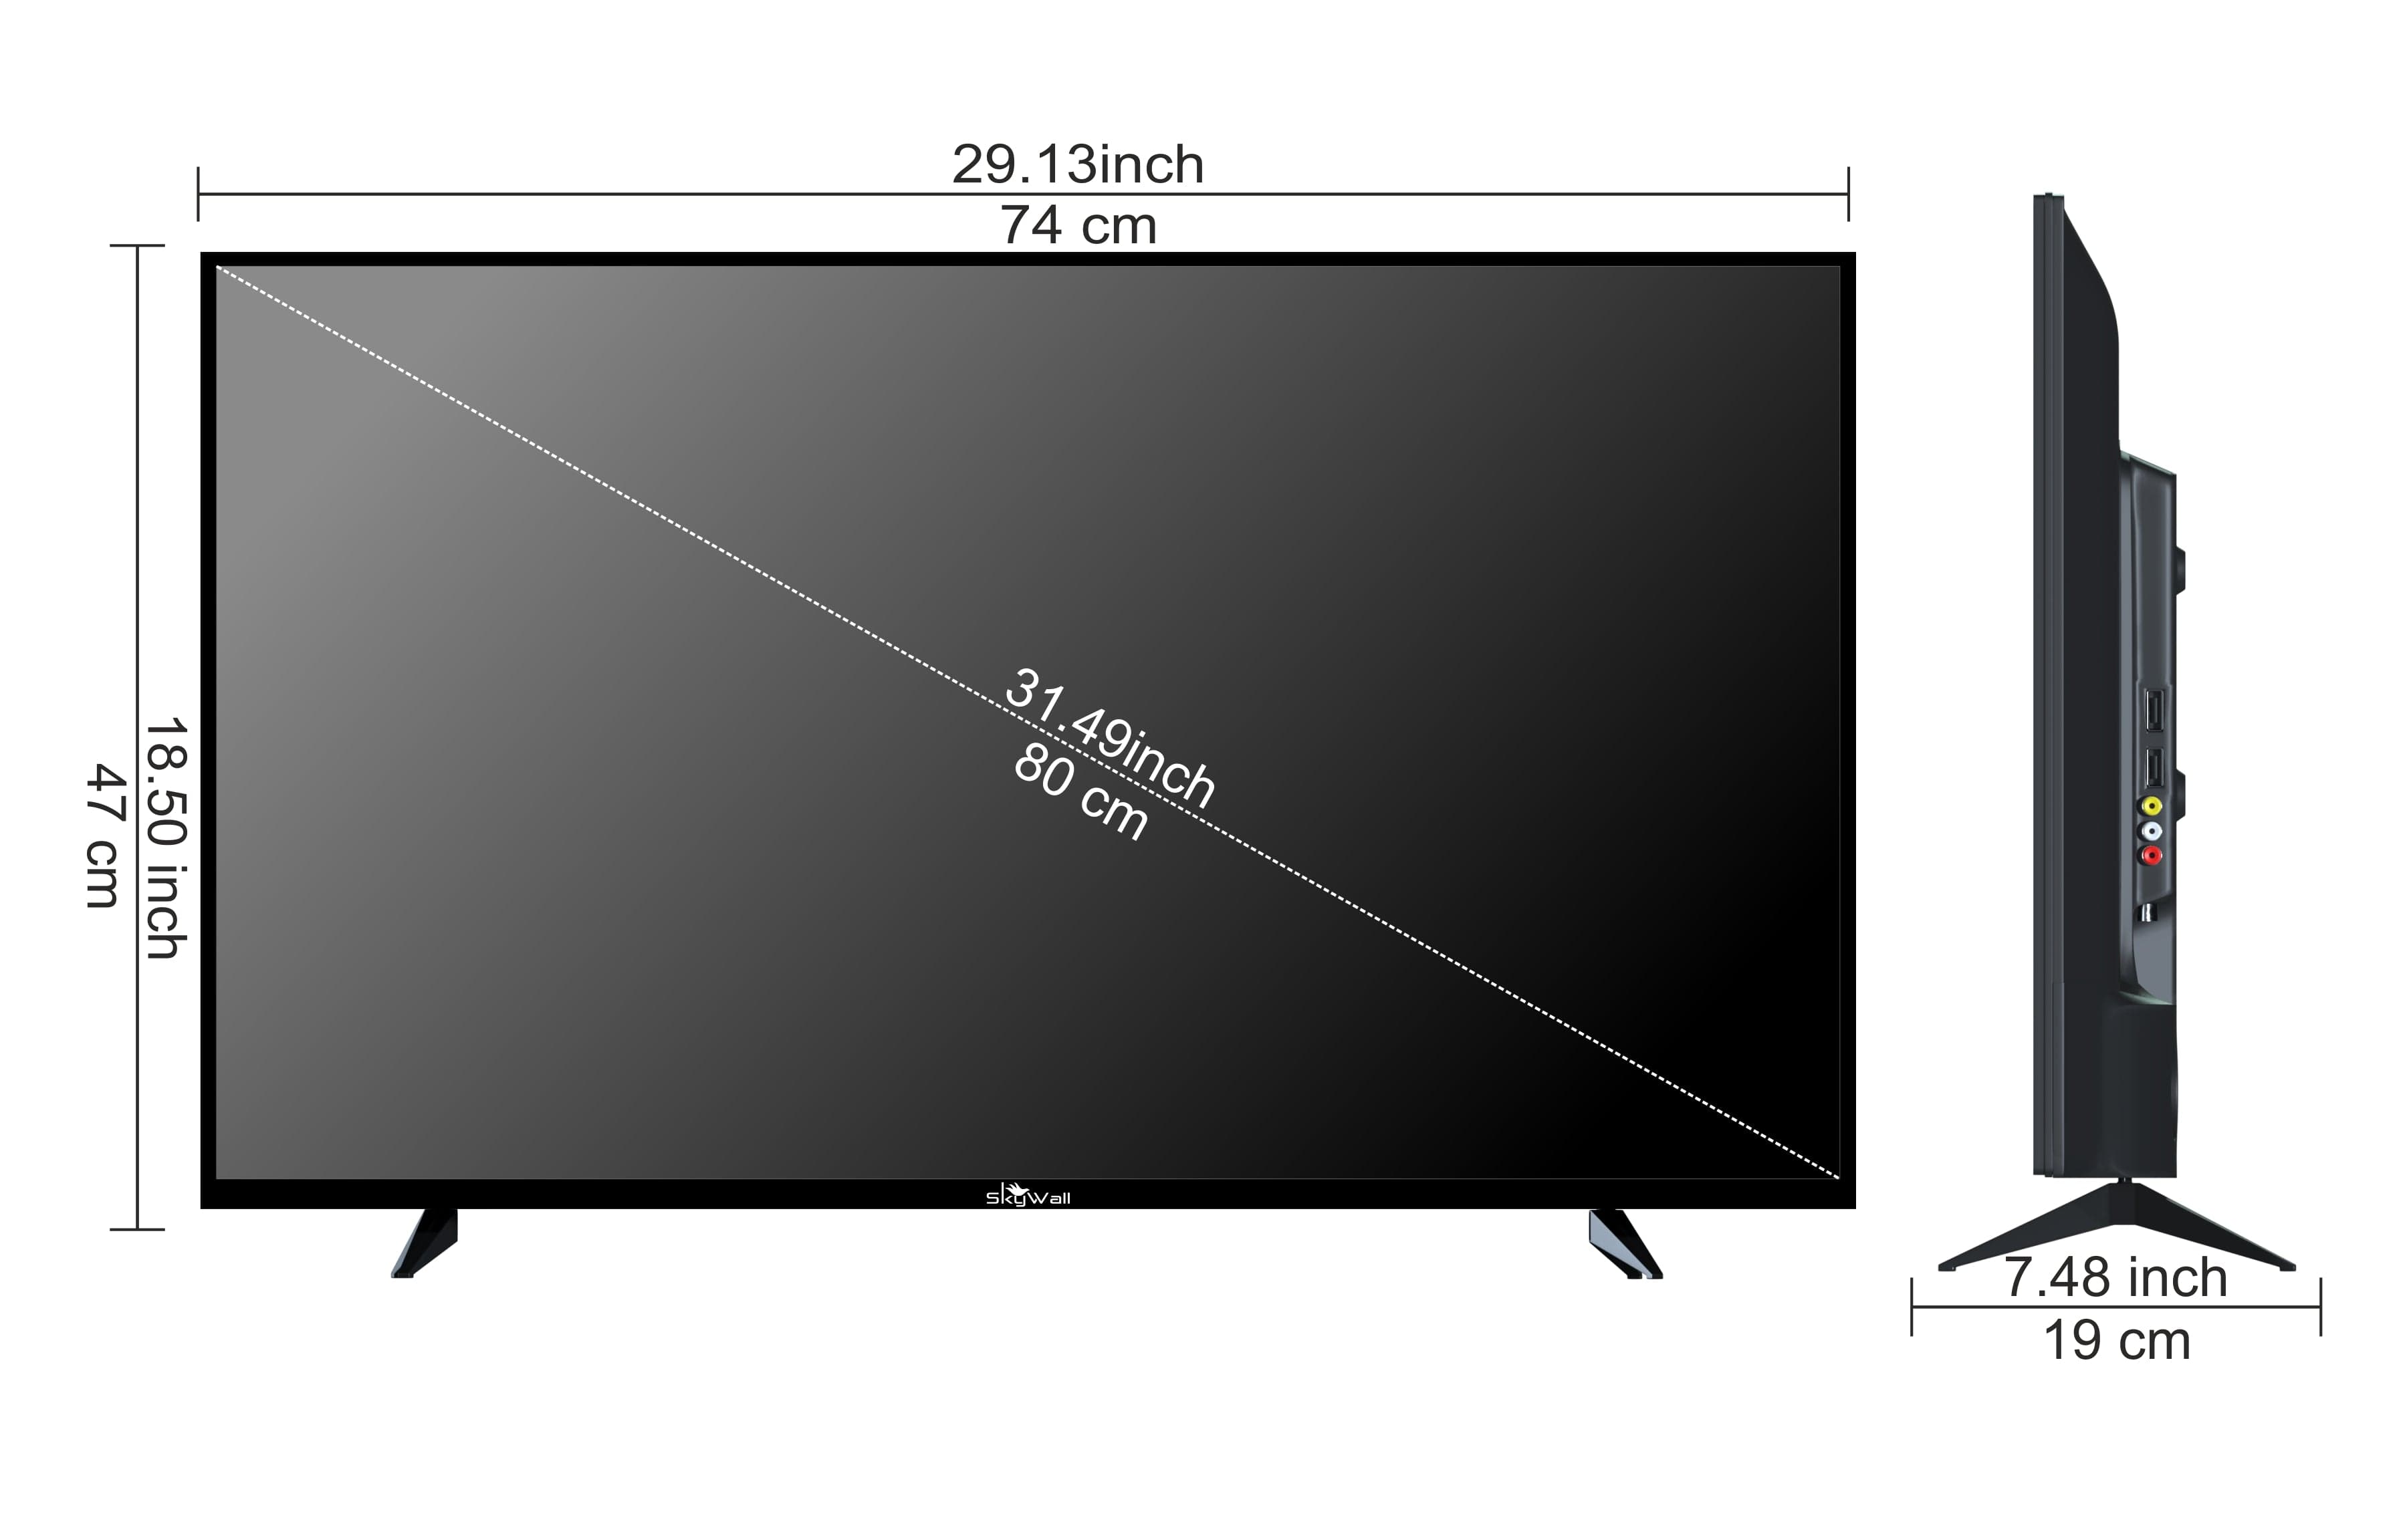 SkyWall 80 cm (32 inches) Full HD Smart Android LED TV 32SWRR Pro  (Frameless Edition) (Dolby Audio)